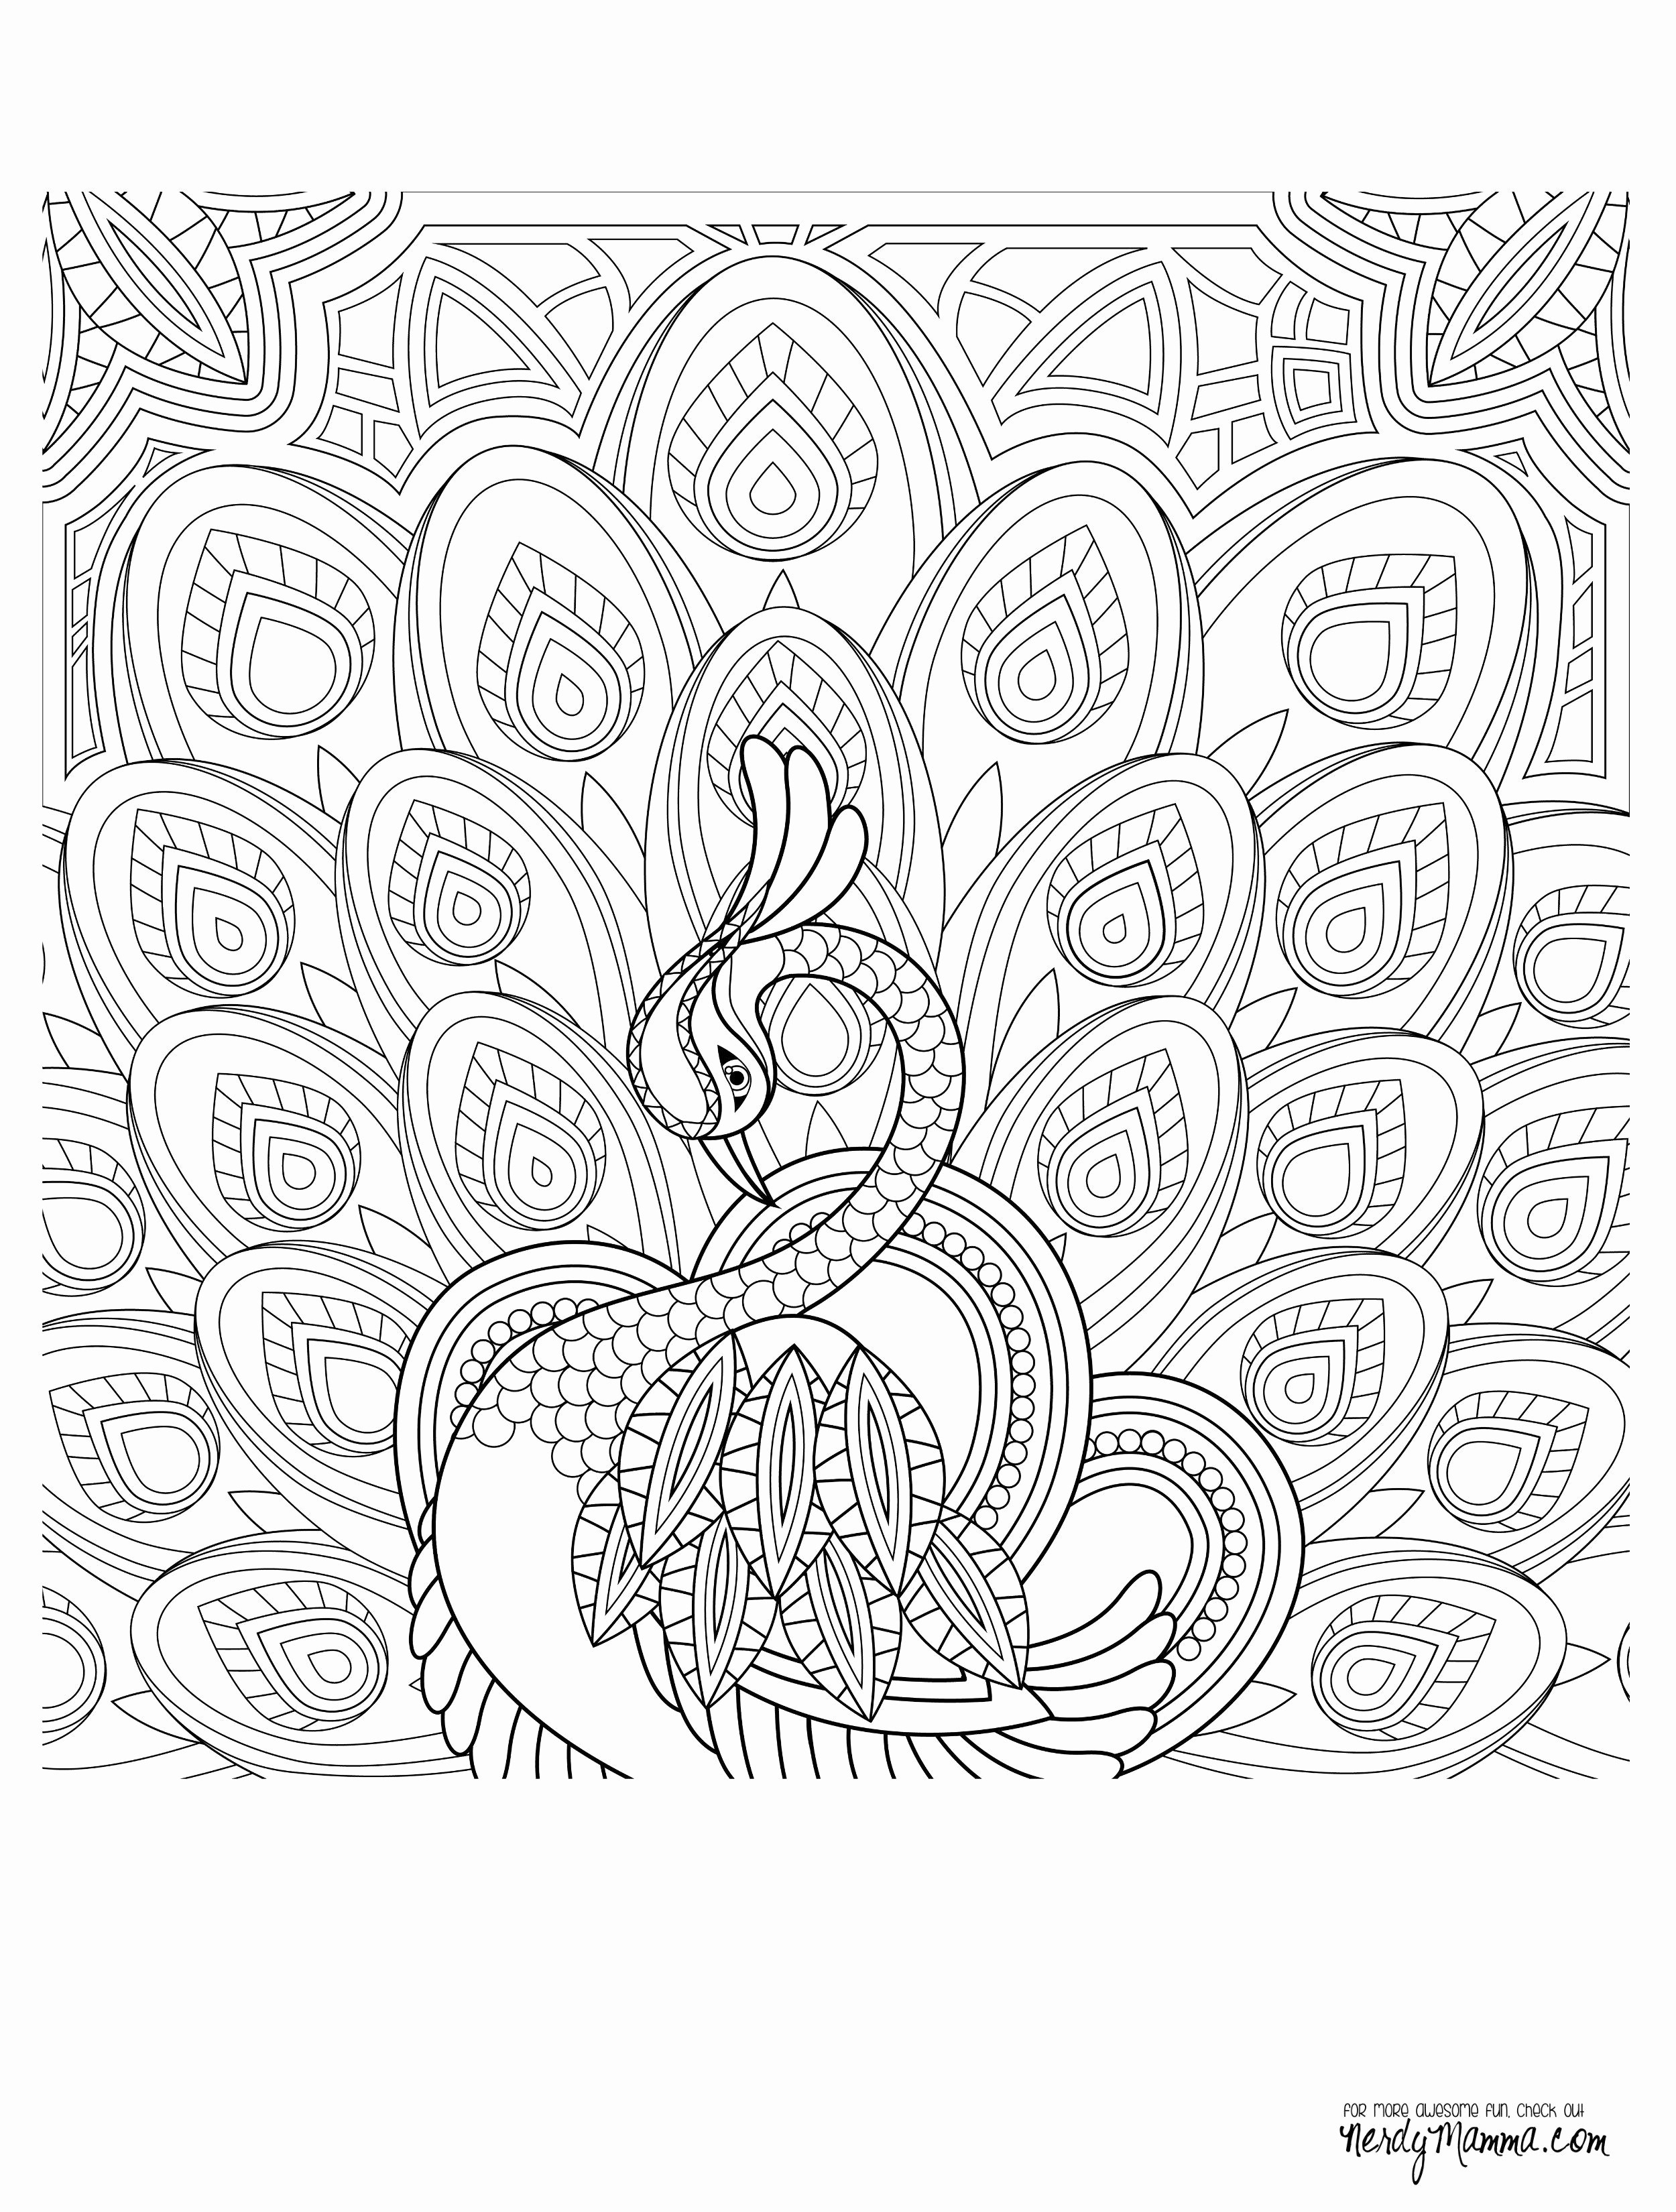 16 Perfect Proflowers Free Vase 2024 free download proflowers free vase of free printable flower coloring pages fresh rose coloring pages for with free printable flower coloring pages elegant 8 free printables coloring pages 2 of free printa